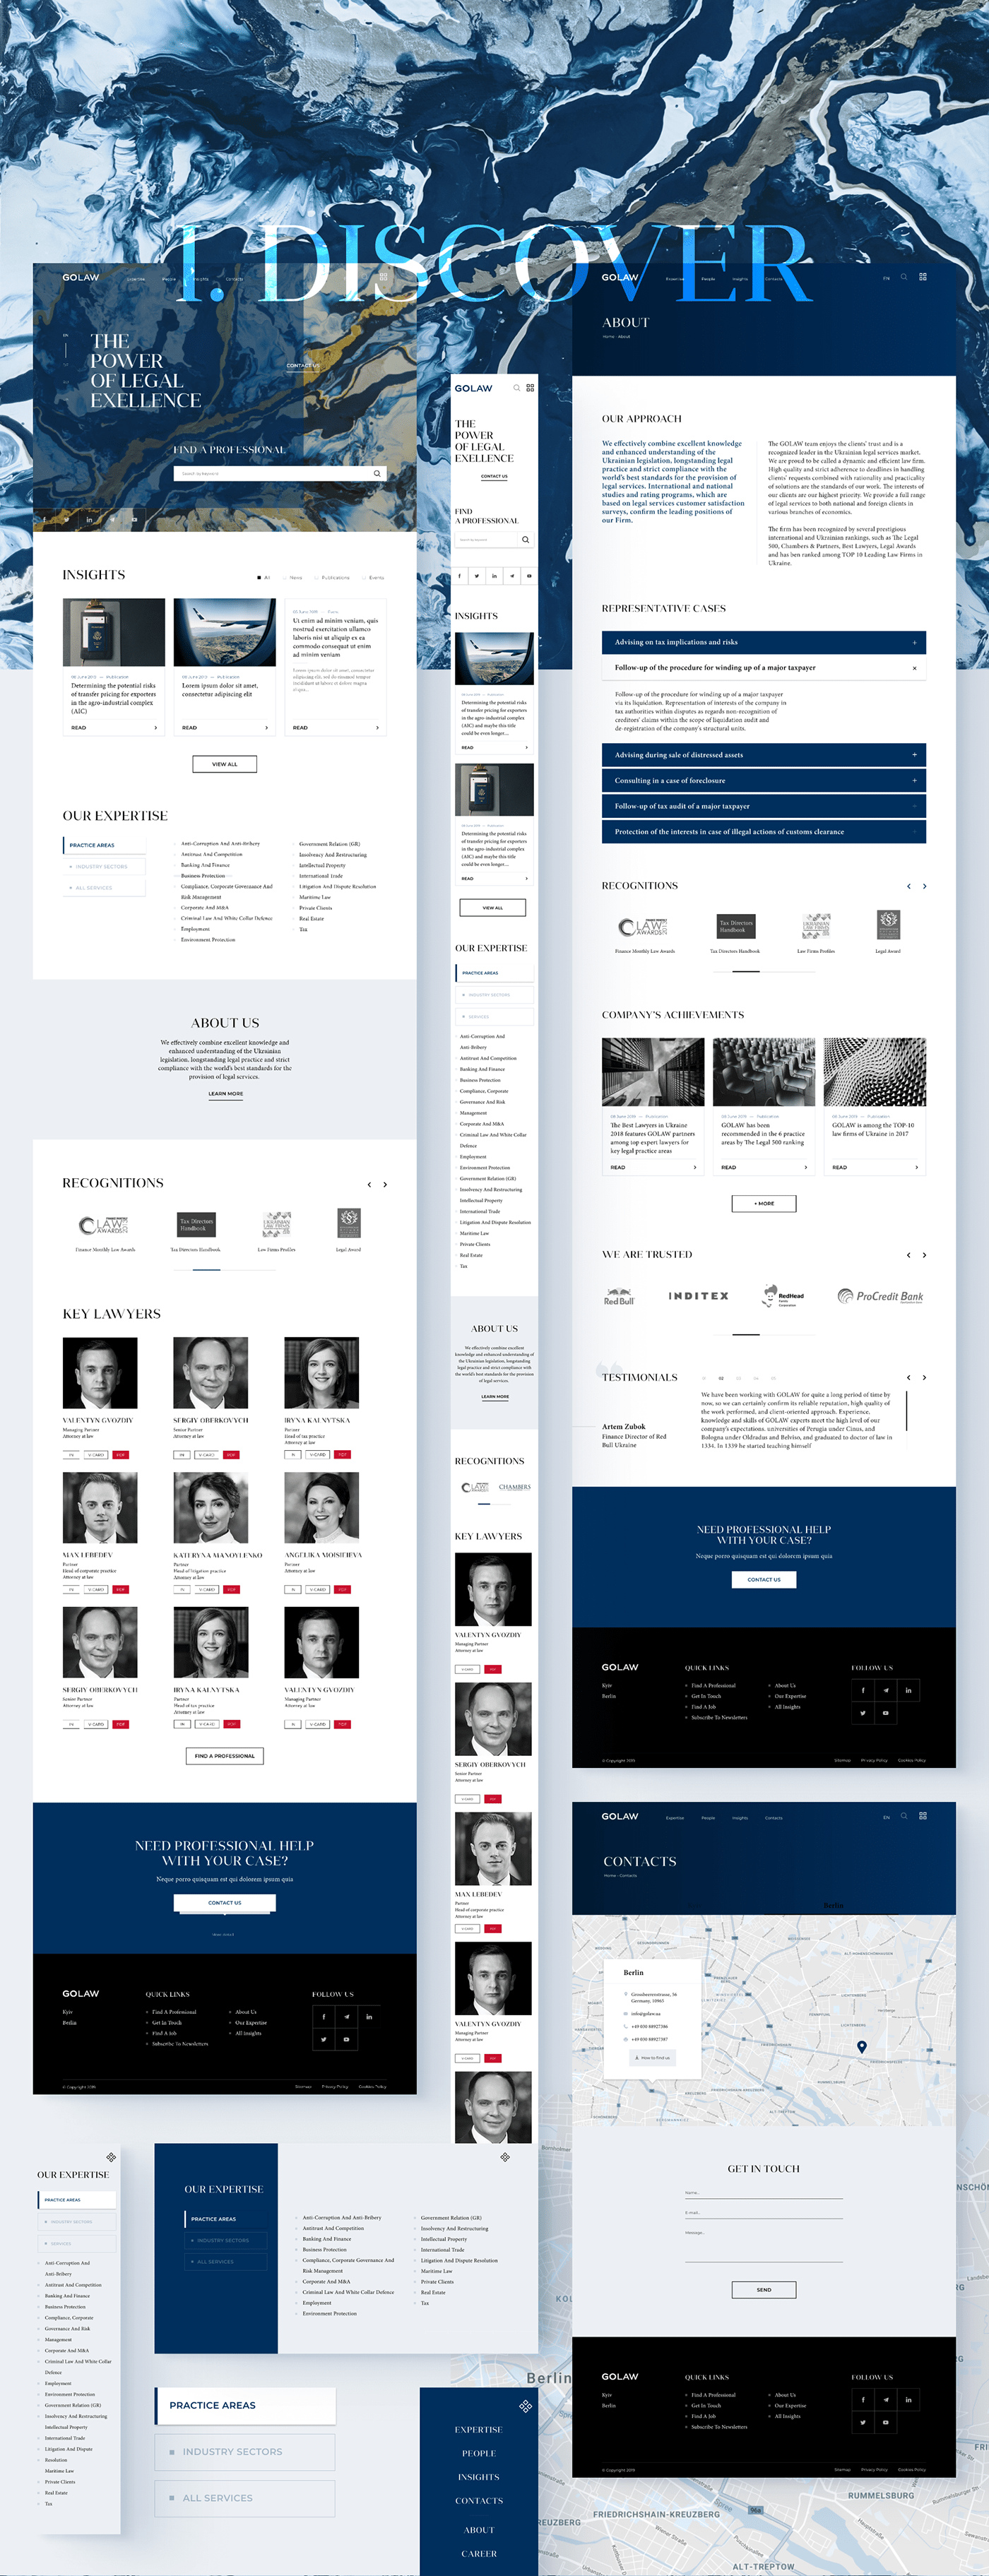 legal assistance legal lawyer corporate business website from scratch Responsive law UI/UX minimalist